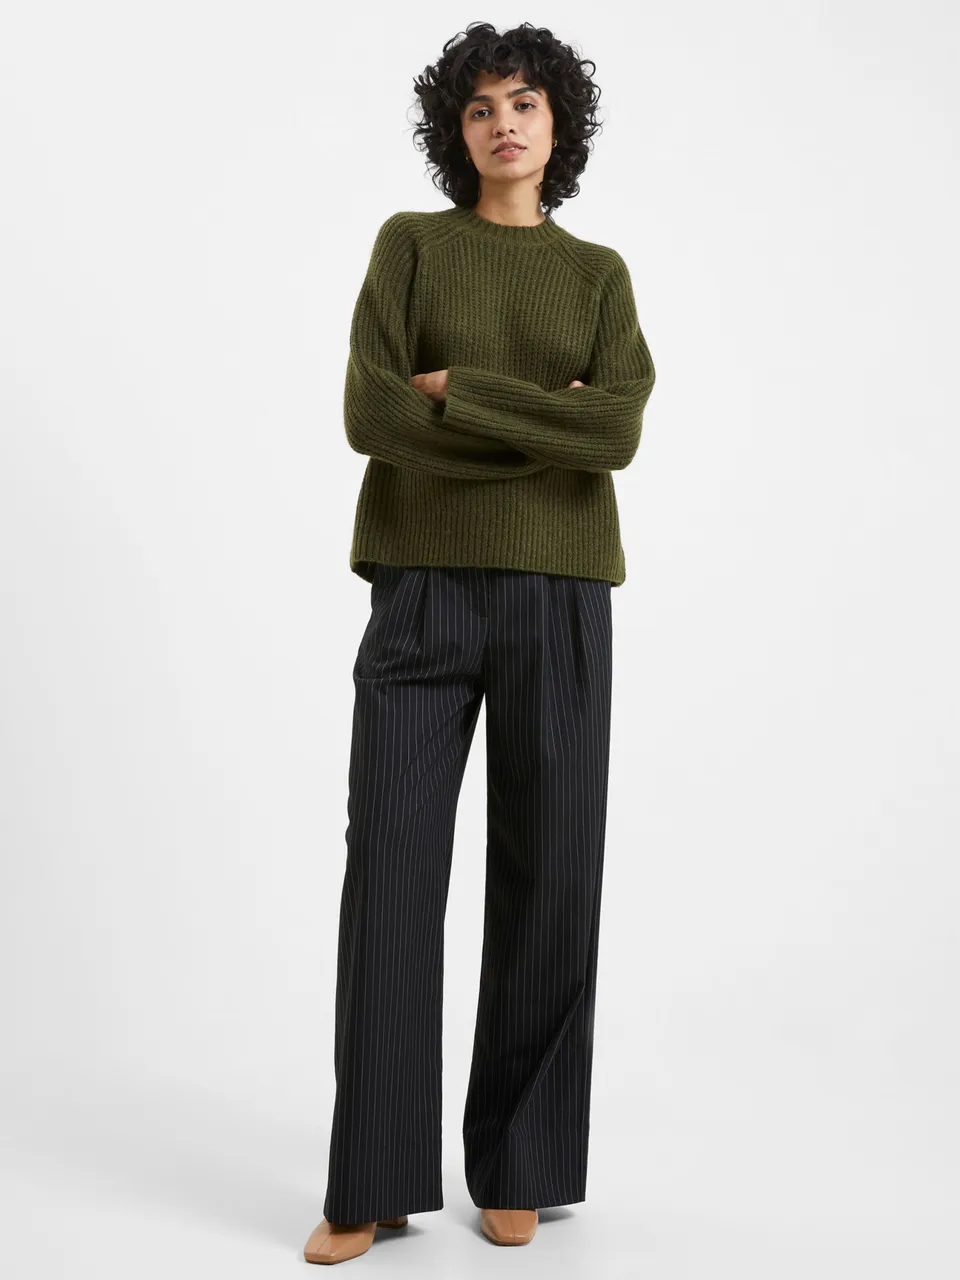 French Connection Jika Jumper - Olive Night - Female